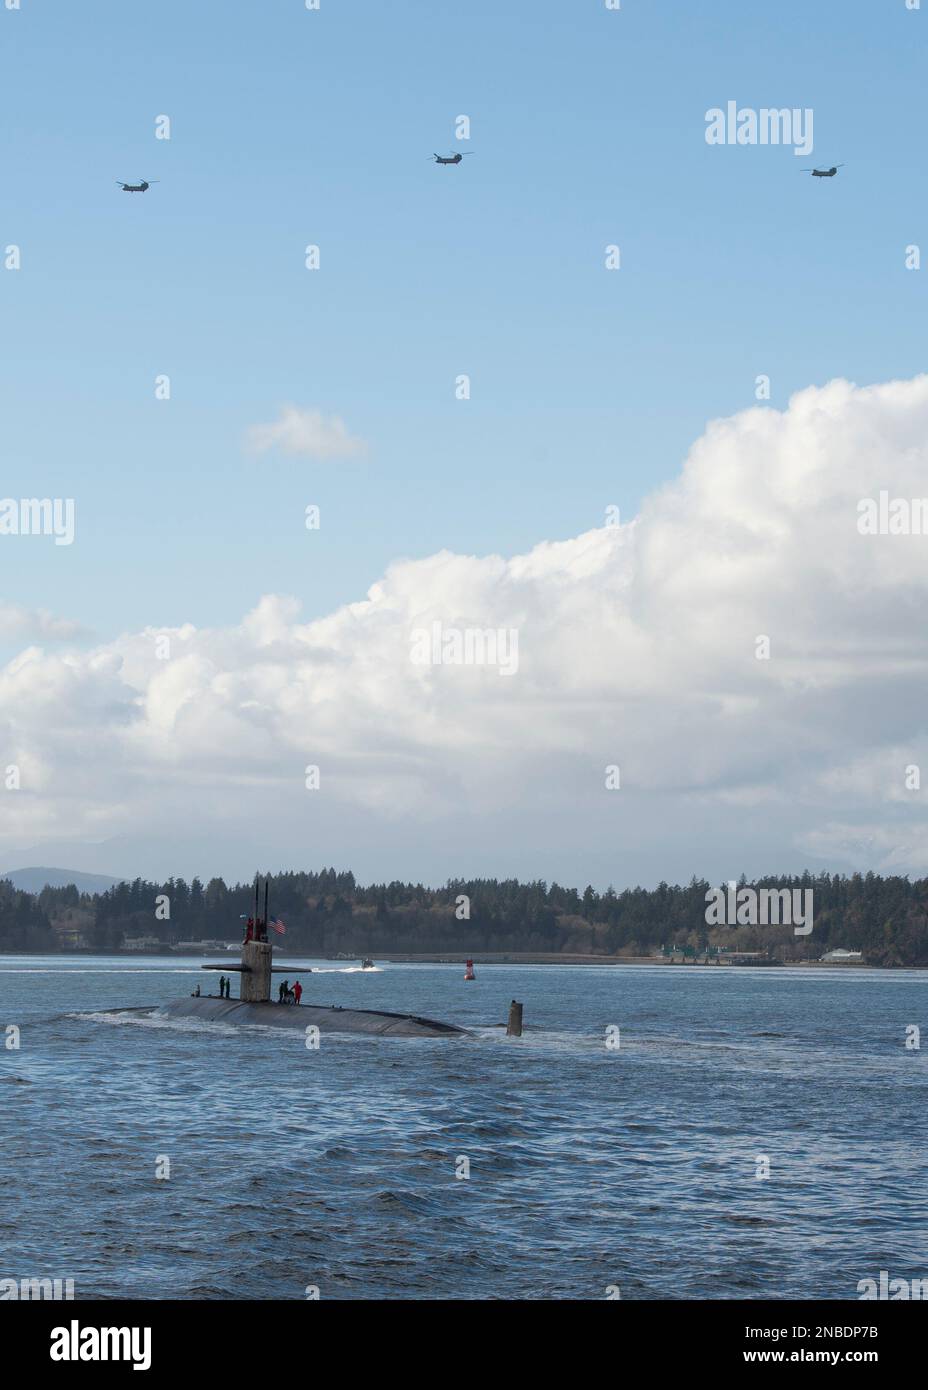 230210-N-ED185-1134  PUGET SOUND, Wash. (Feb. 10, 2023) The Los Angeles-class fast-attack submarine USS Key West (SSN 722) transits the Puget Sound before mooring at Naval Base Kitsap – Bremerton, Washington, February 10, 2023. Measuring more than 360 feet long and weighing more than 6,900 tons when submerged, Key West supports a multitude of missions to include anti-submarine warfare, anti-surface ship warfare, surveillance and reconnaissance, and strike warfare. (U.S. Navy Photo by Mass Communication Specialist 1st Class Brian. G. Reynolds) Stock Photo